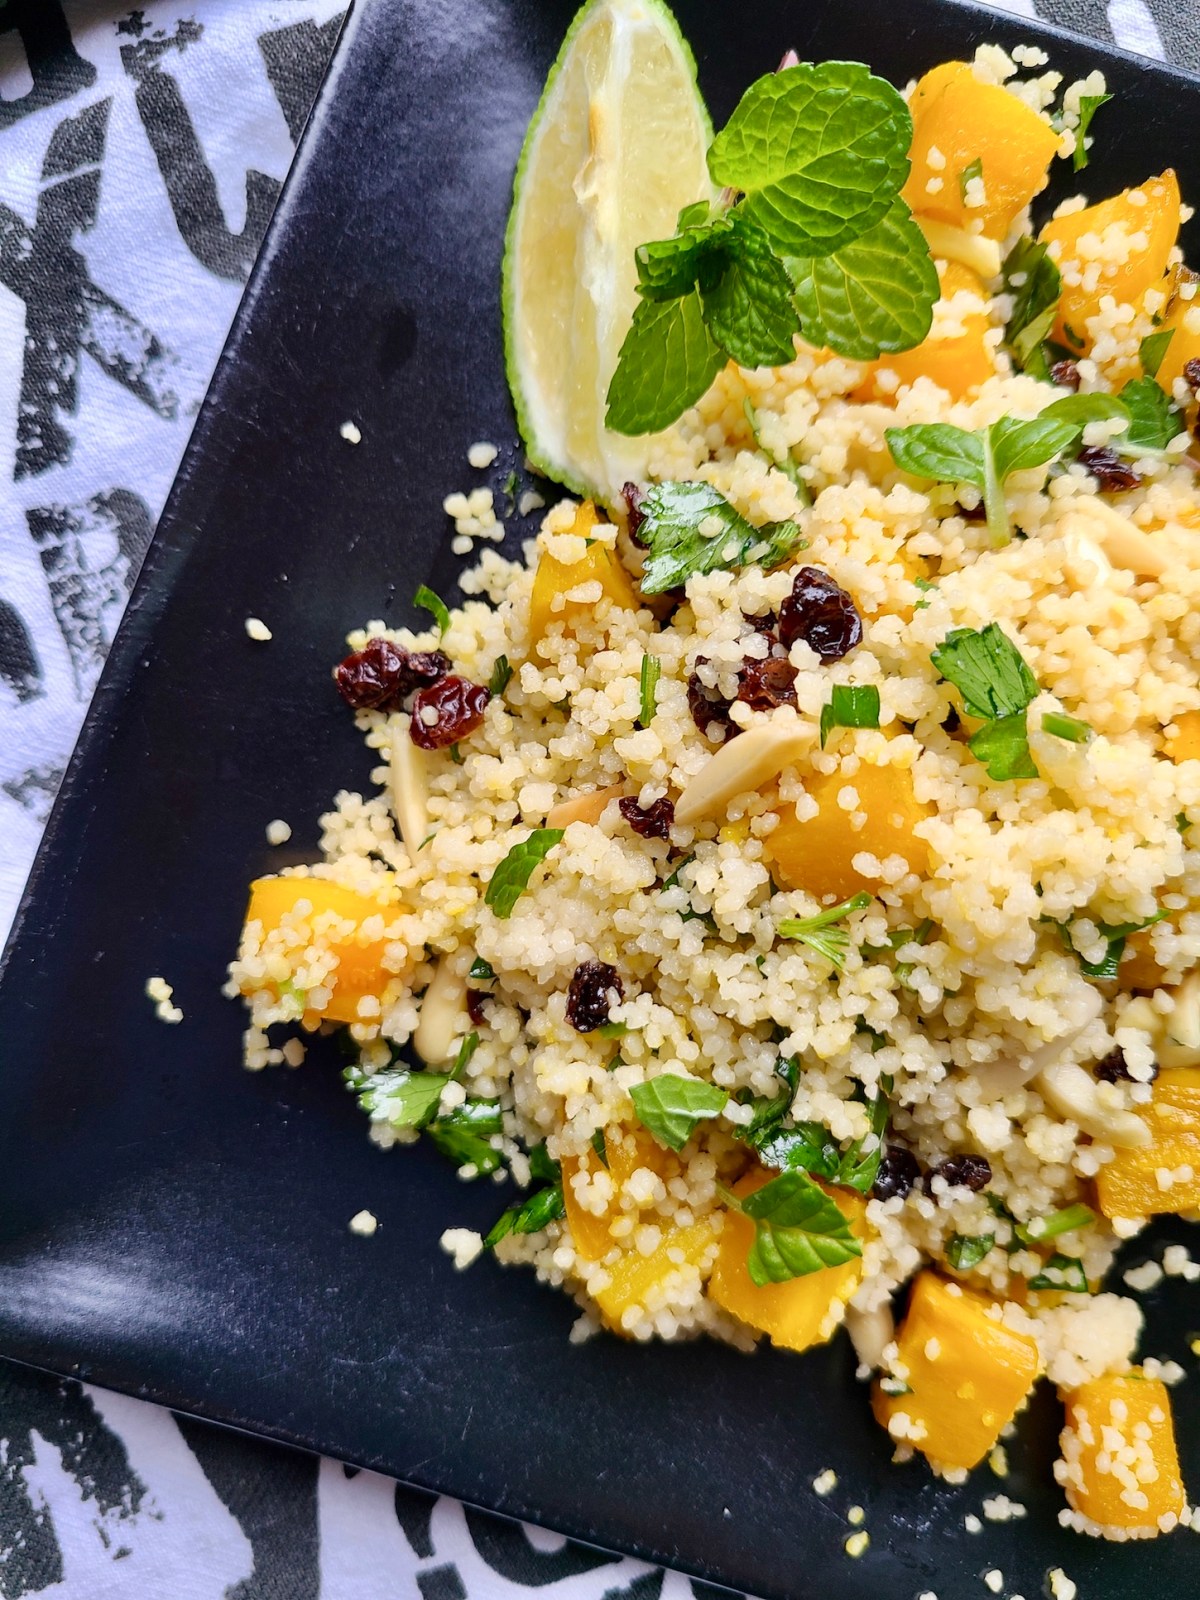 Golden Beetroot and Couscous Salad with Slivered Almonds and Dried Currants